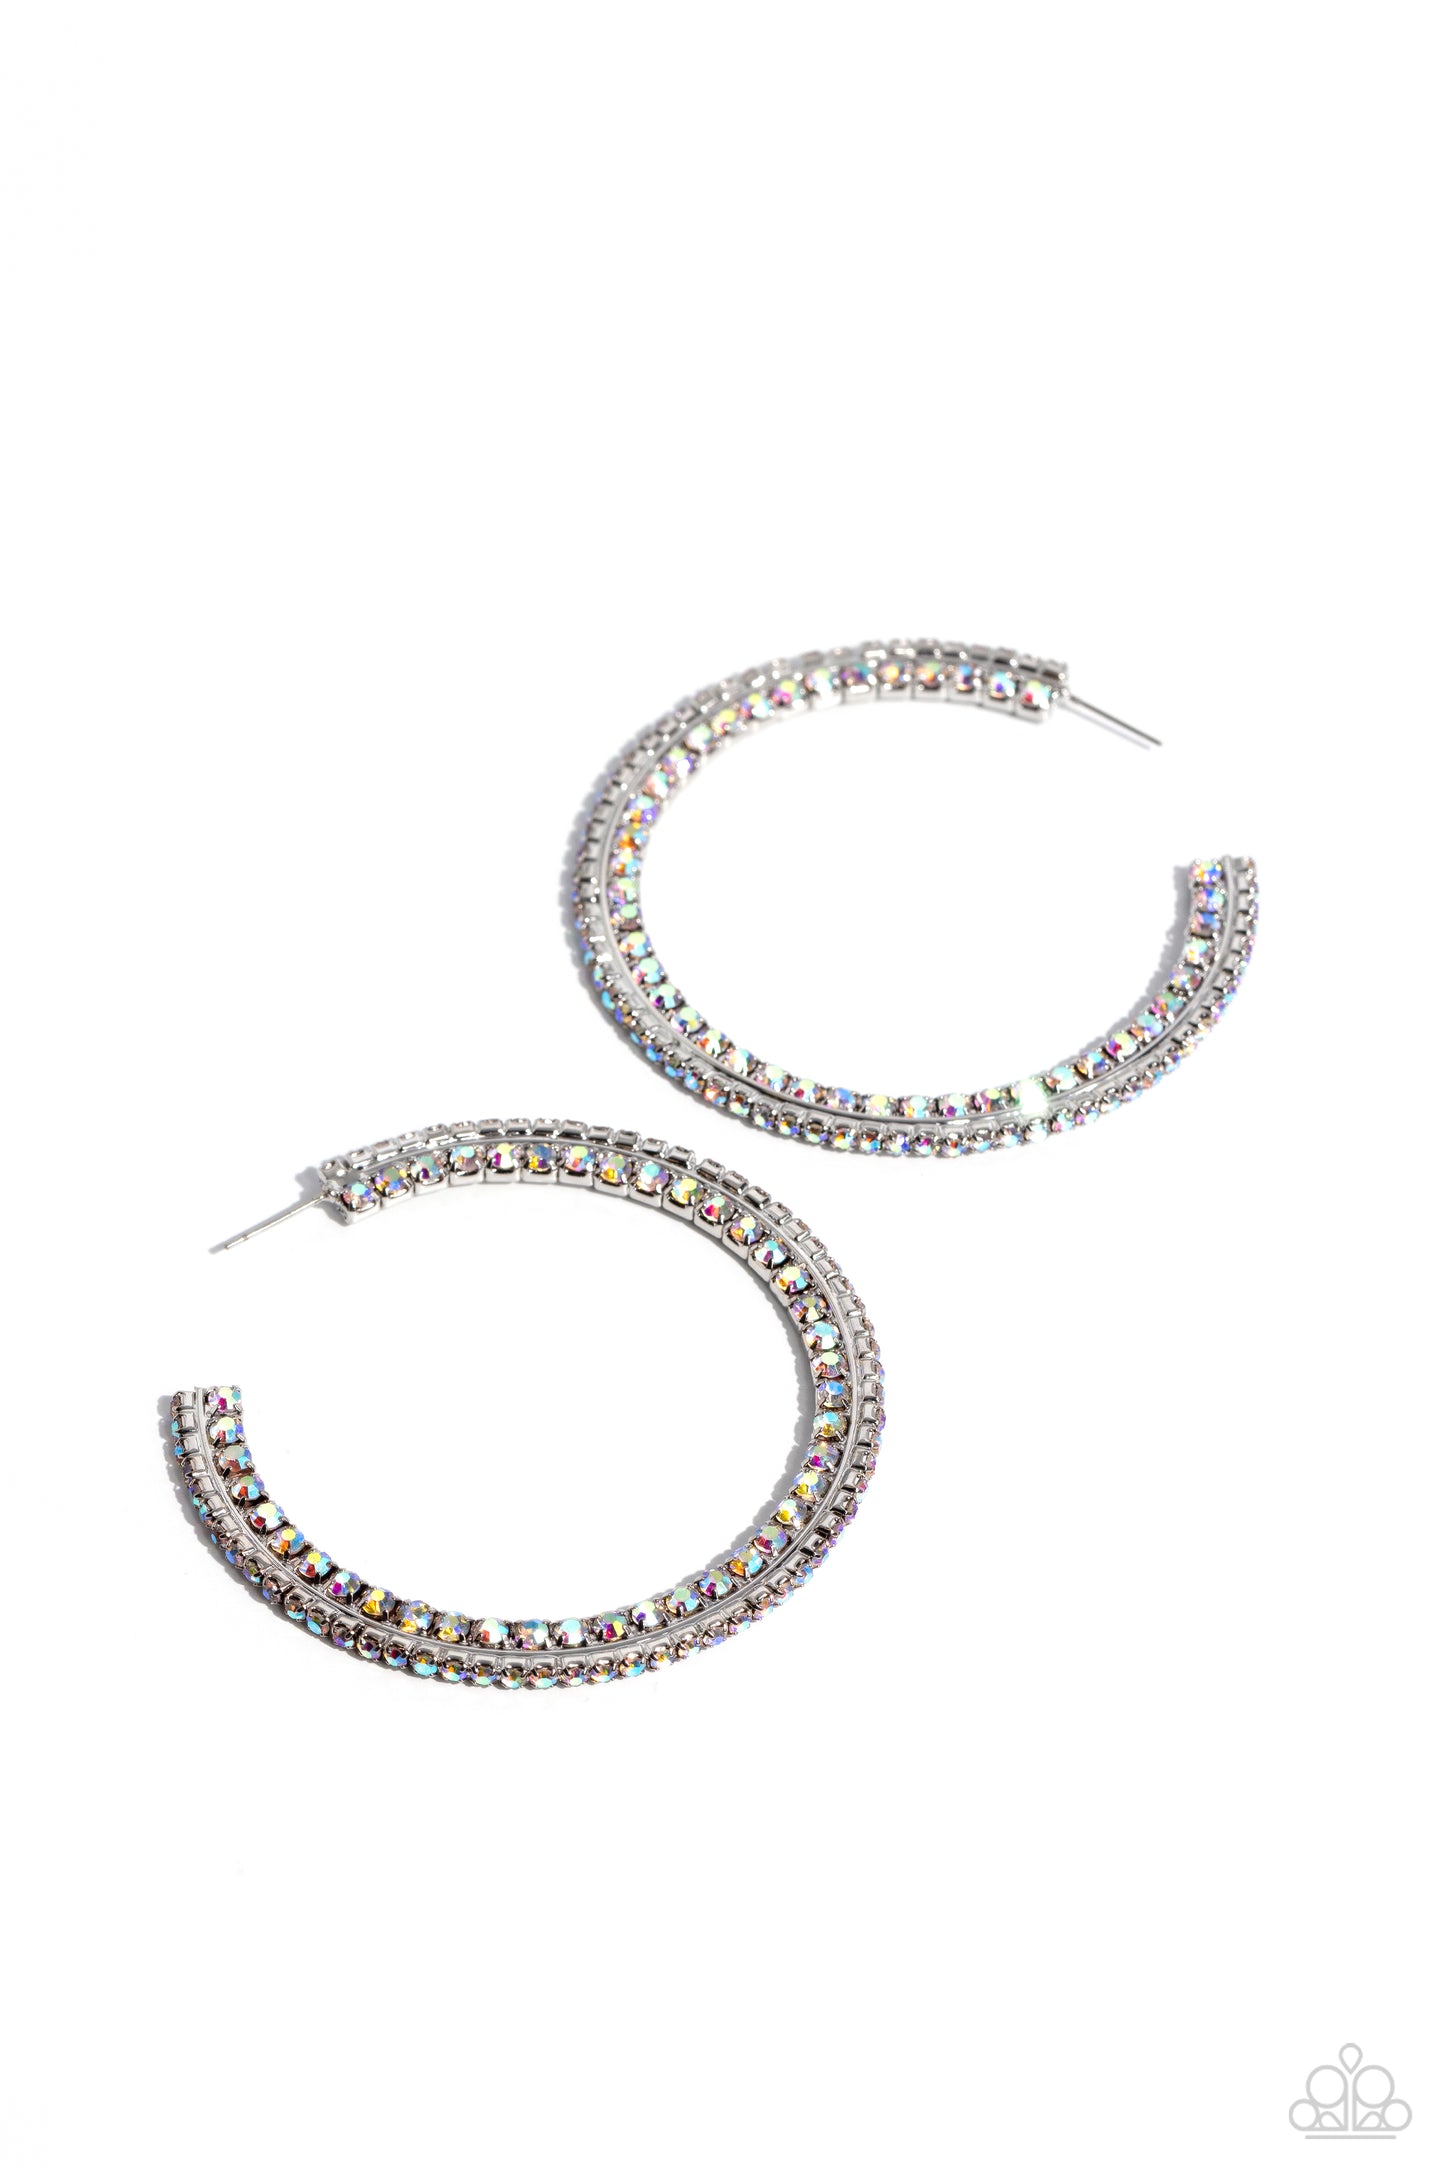 Scintillating Sass Multi Hoop Earring - Paparazzi Accessories  Glittery iridescent rhinestones are encrusted along the front and side of a textured tread-like oversized silver hoop for a sassy finish. Earring attaches to a standard post fitting. Hoop measures 2 1/2" in diameter. Due to its prismatic palette, color may vary.  Sold as one pair of hoop earrings.  P5HO-MTXX-093XX